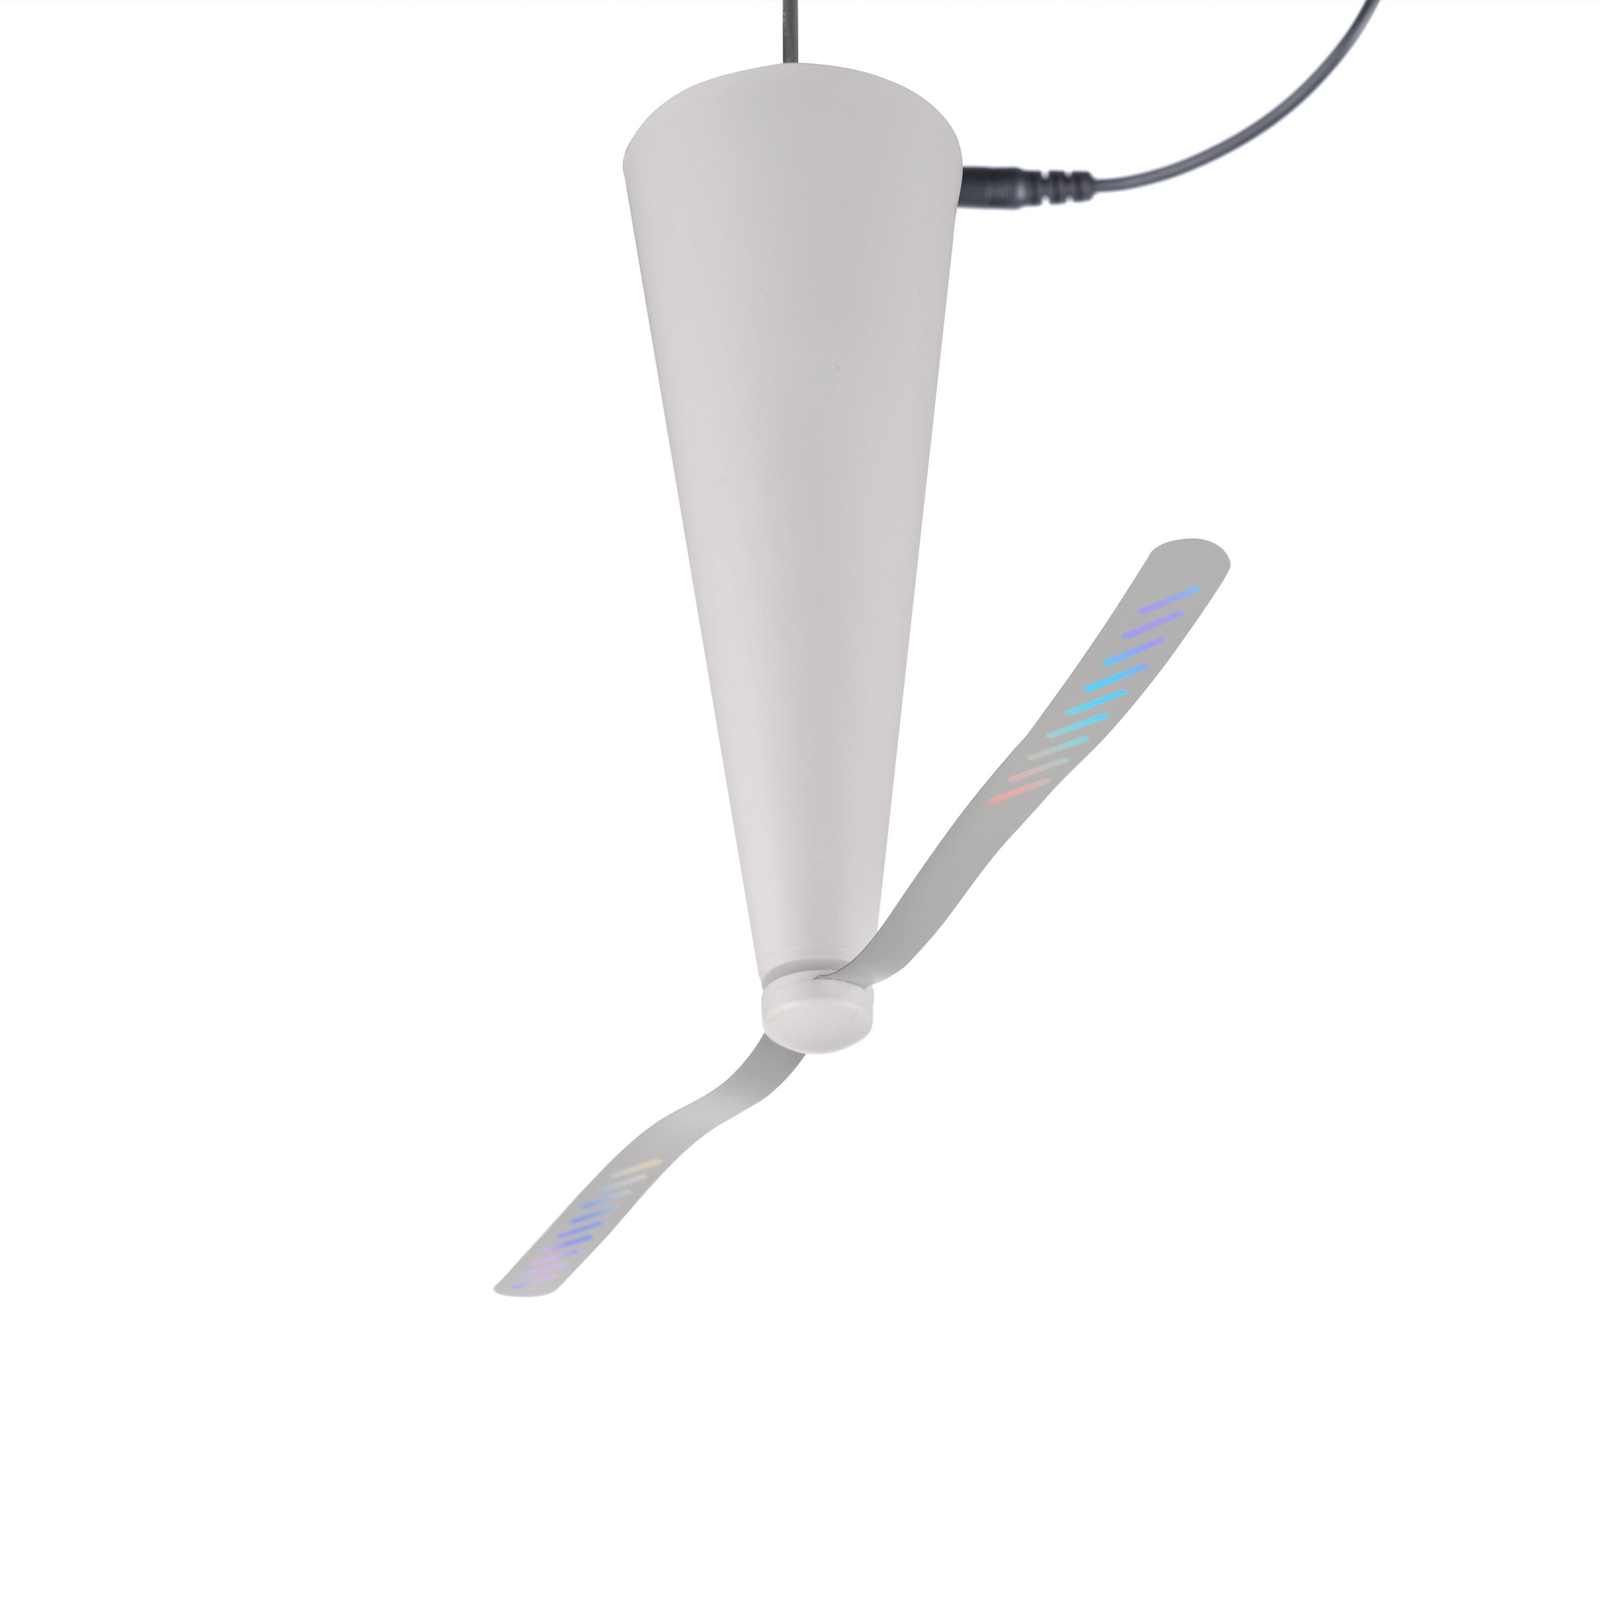 JUST LIGHT. Swat fly whisk, battery-operated, white